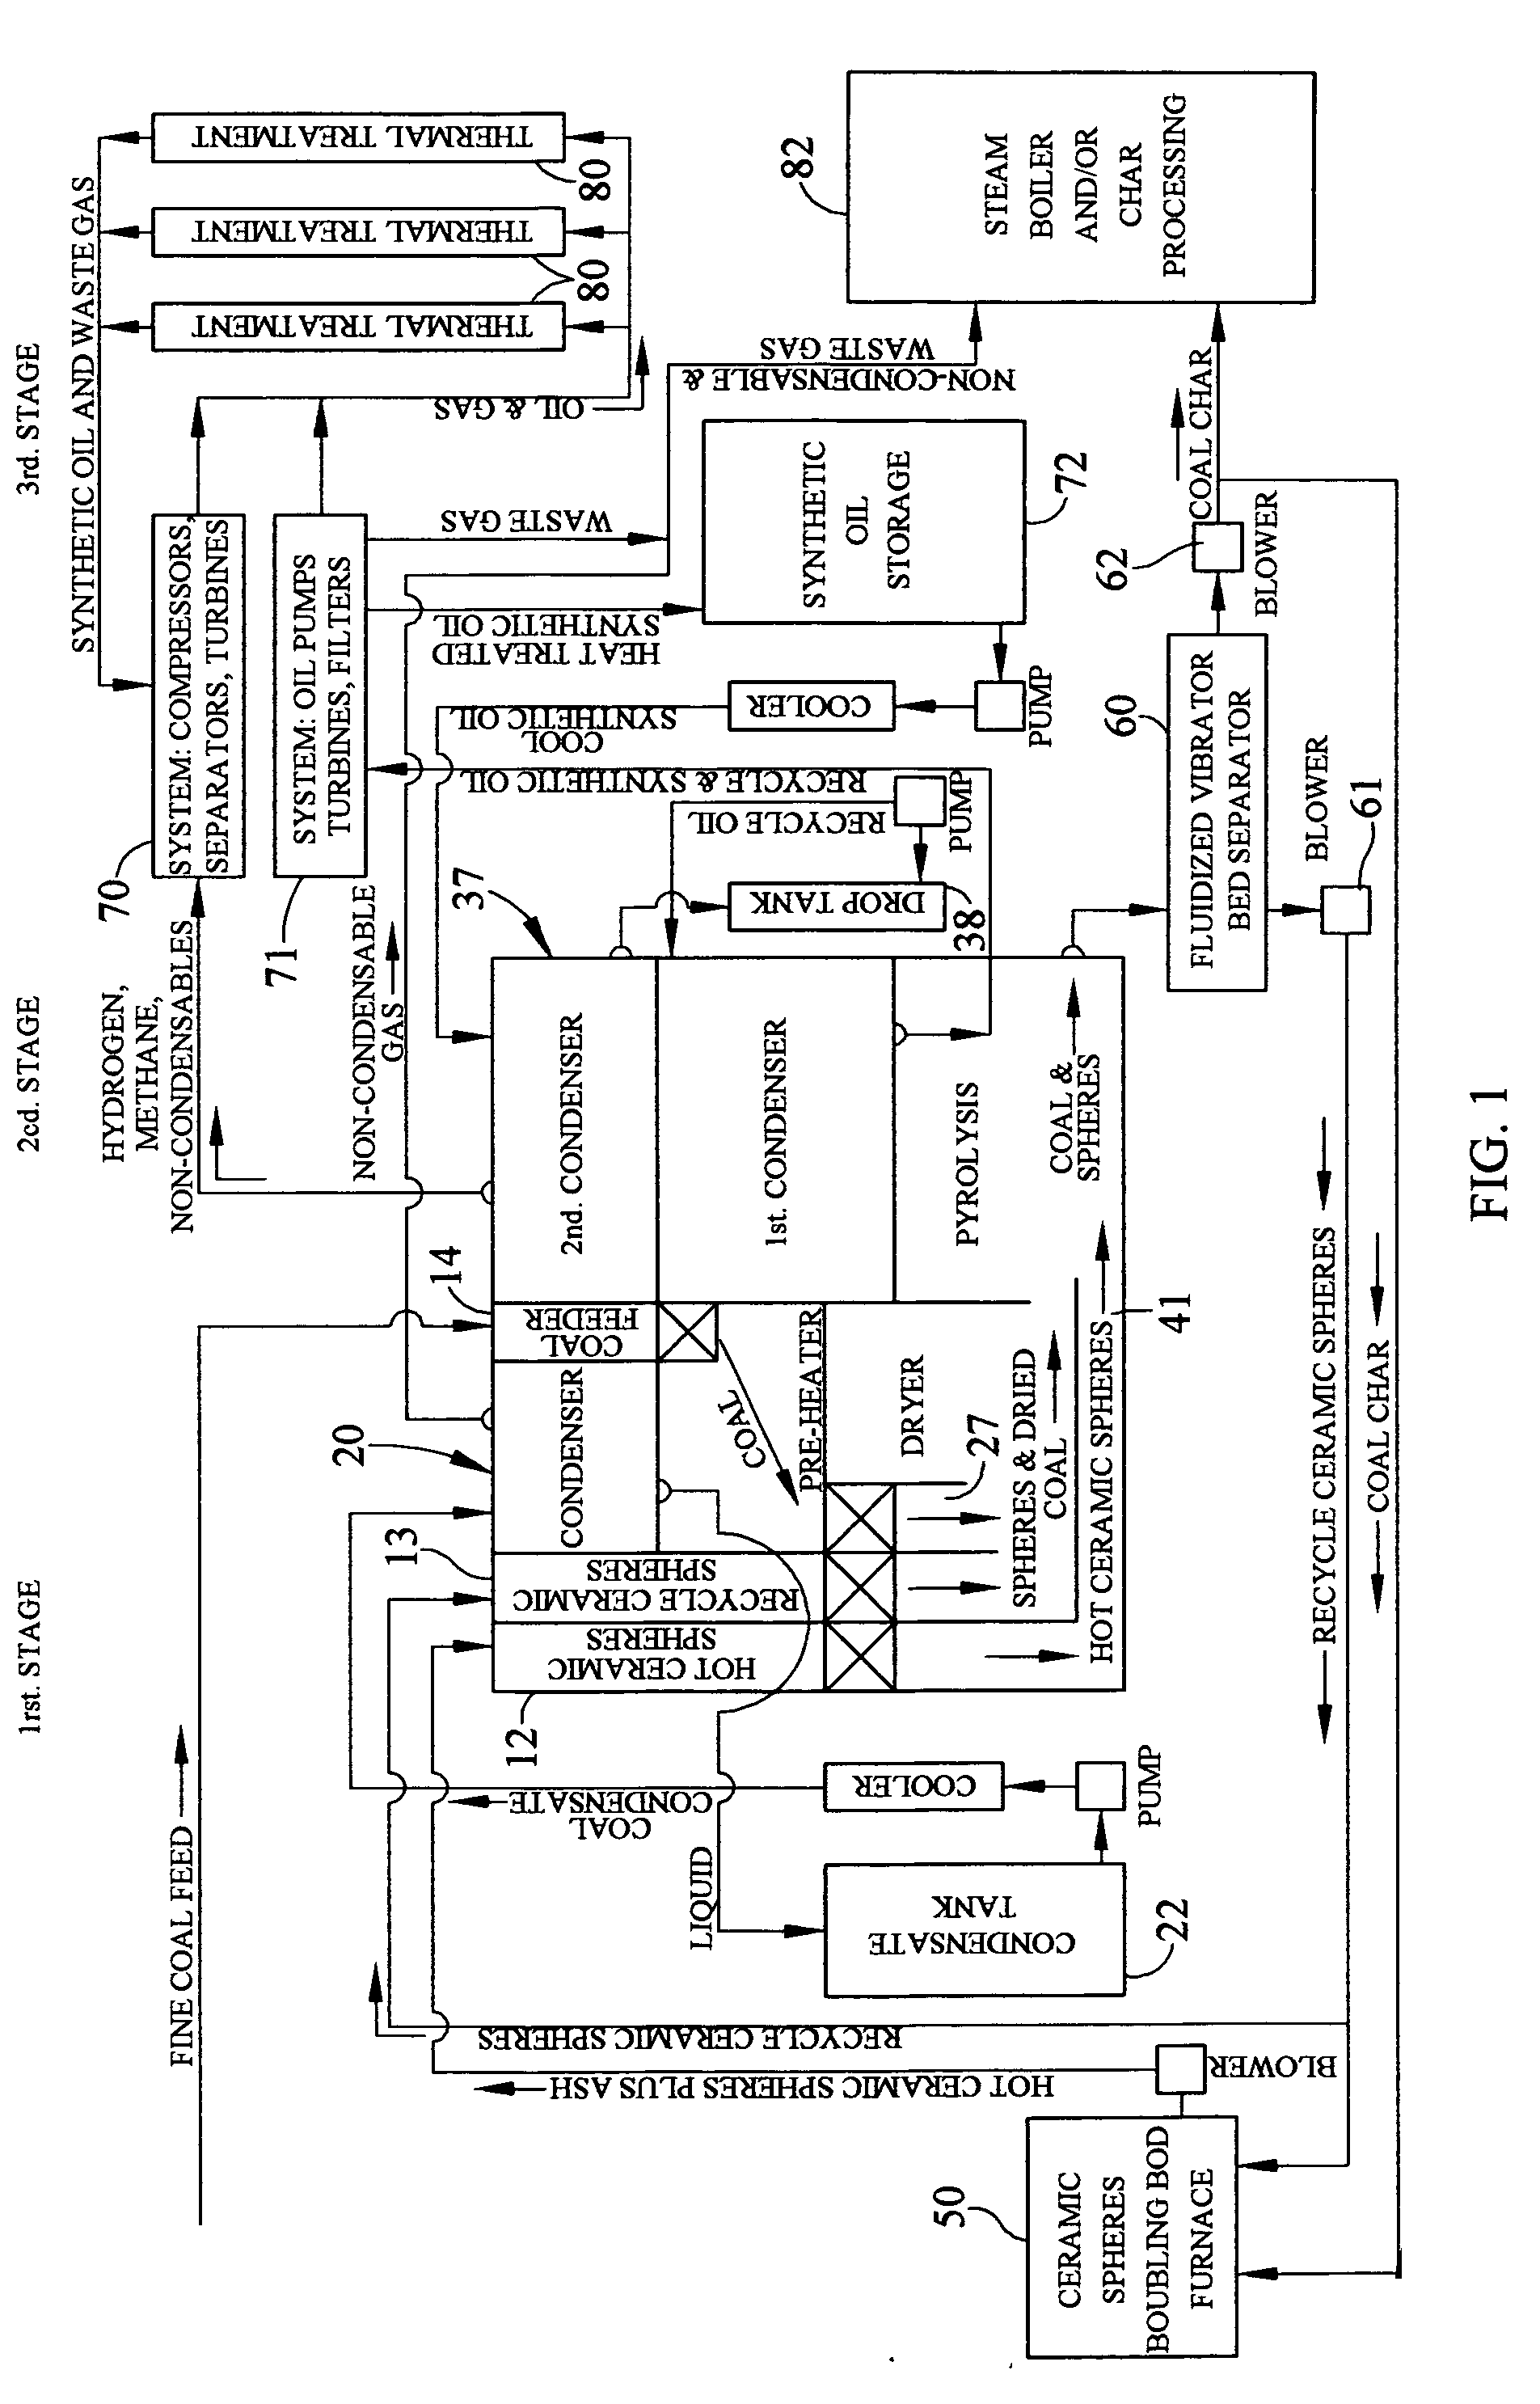 Process for producing synthetic oil from solid hydrocarbon resources